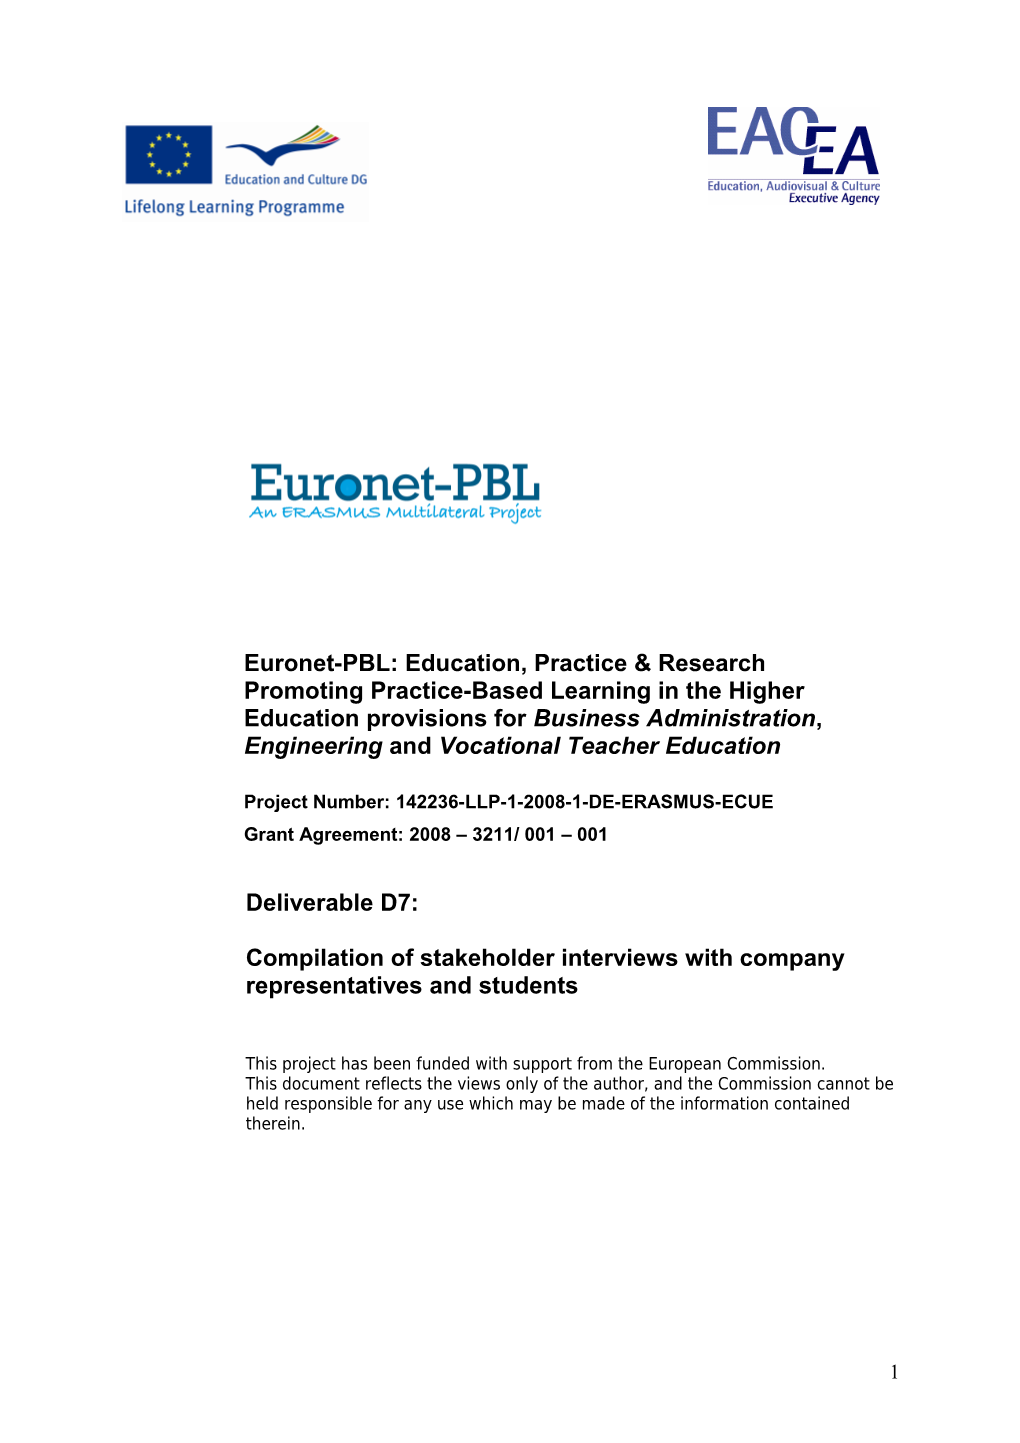 Euronet-PBL: Education, Practice & Research